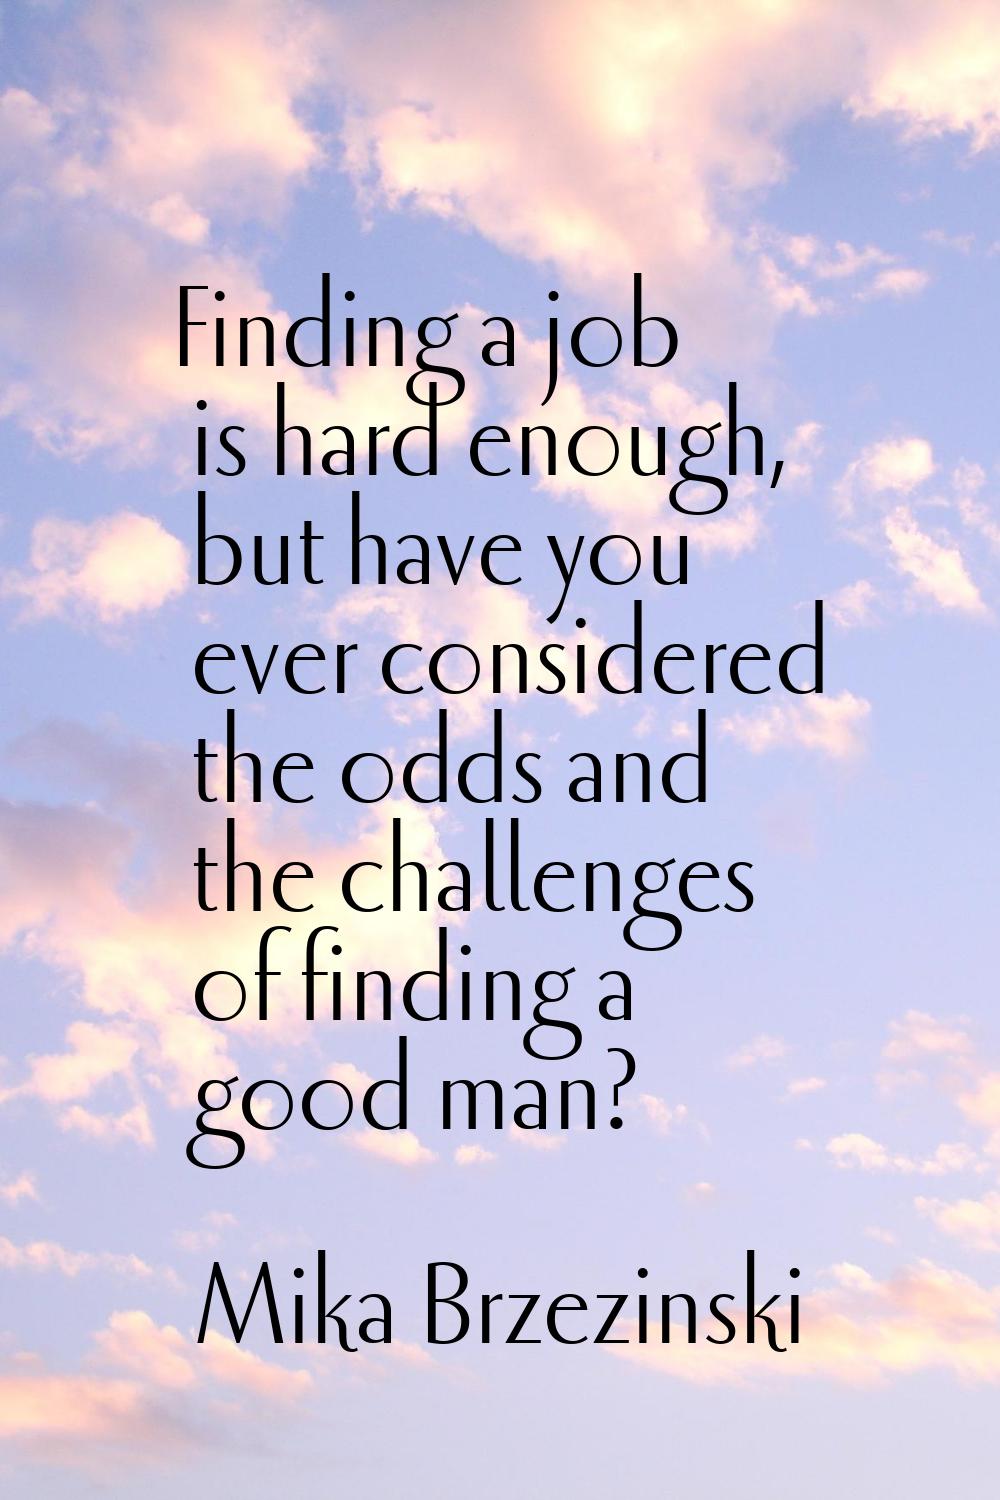 Finding a job is hard enough, but have you ever considered the odds and the challenges of finding a